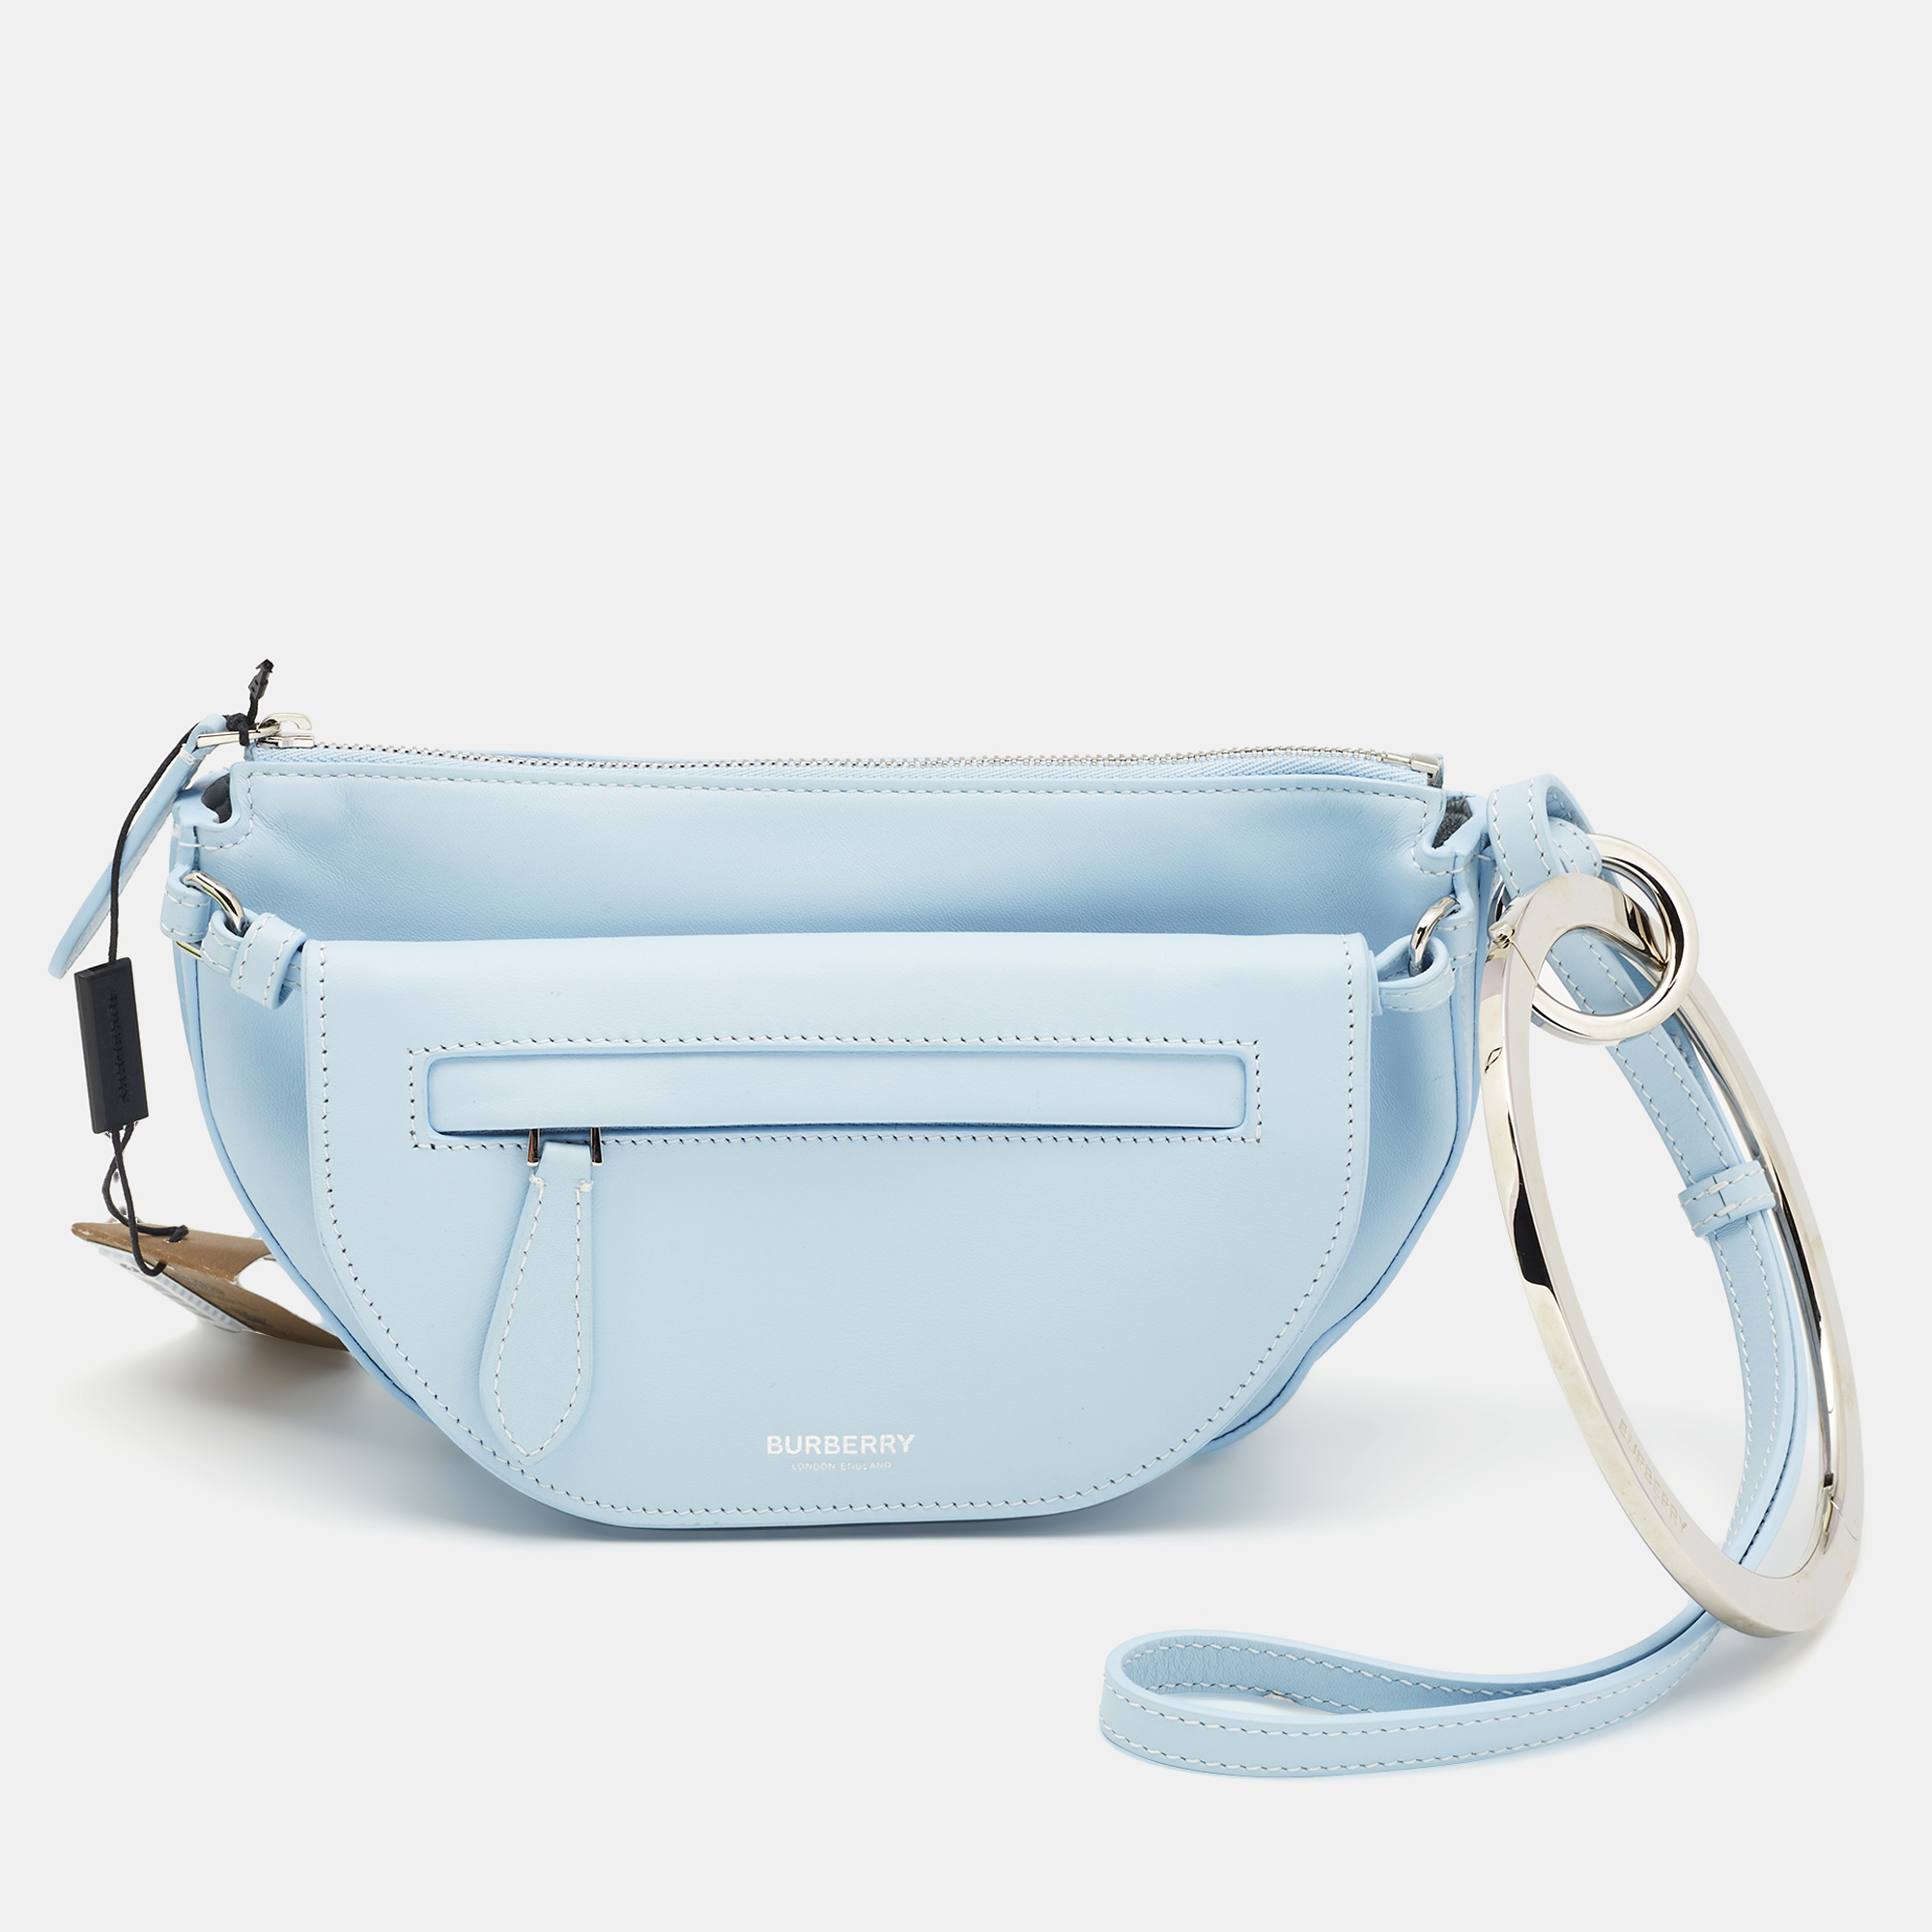 Pre-owned Burberry Light Blue Leather Mini Double Olympia Clutch Bag